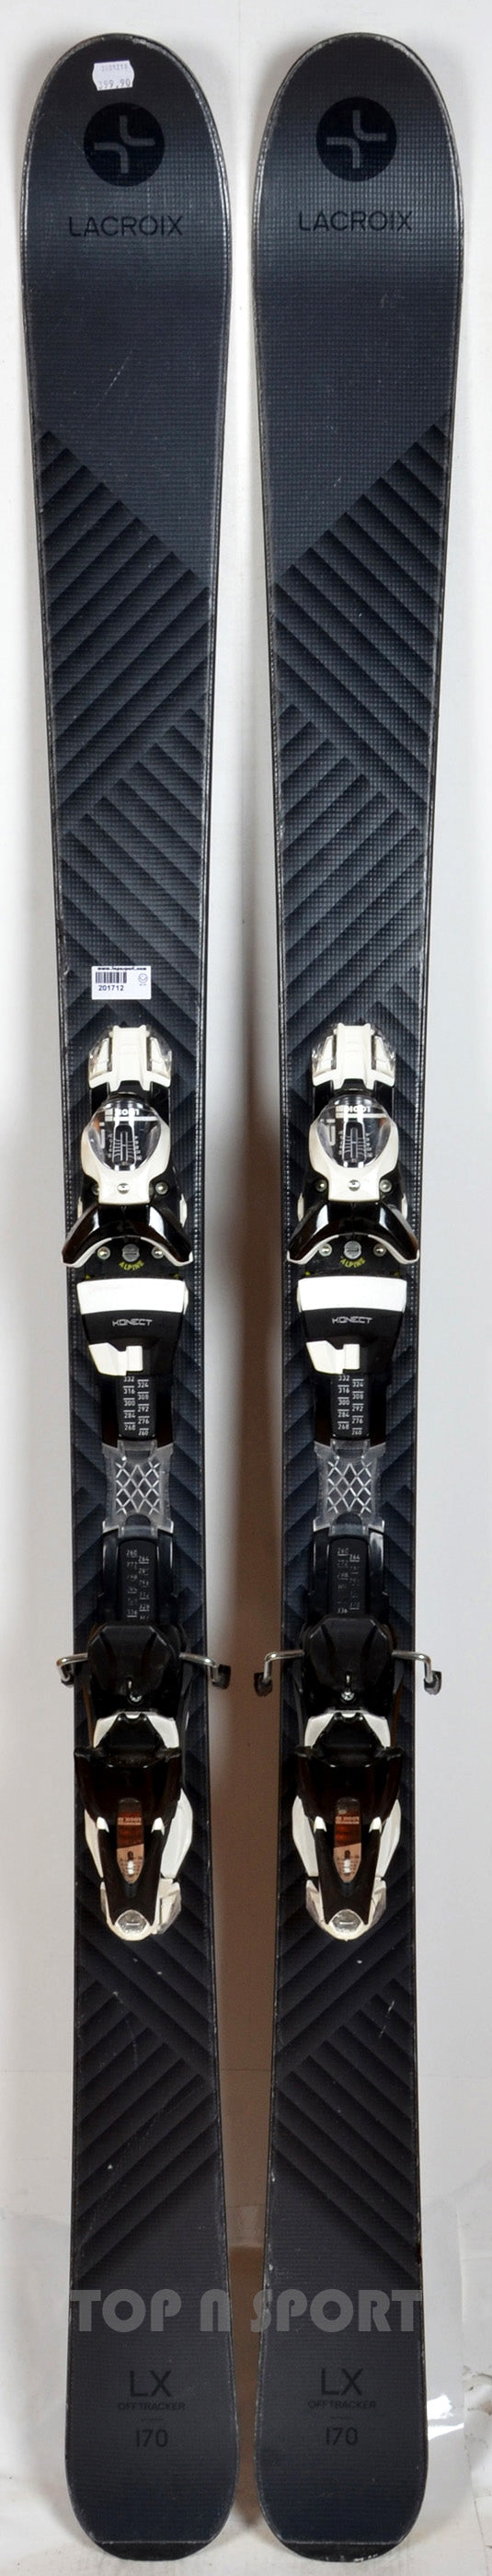 Lacroix LX OFFTRACKER - skis d'occasion